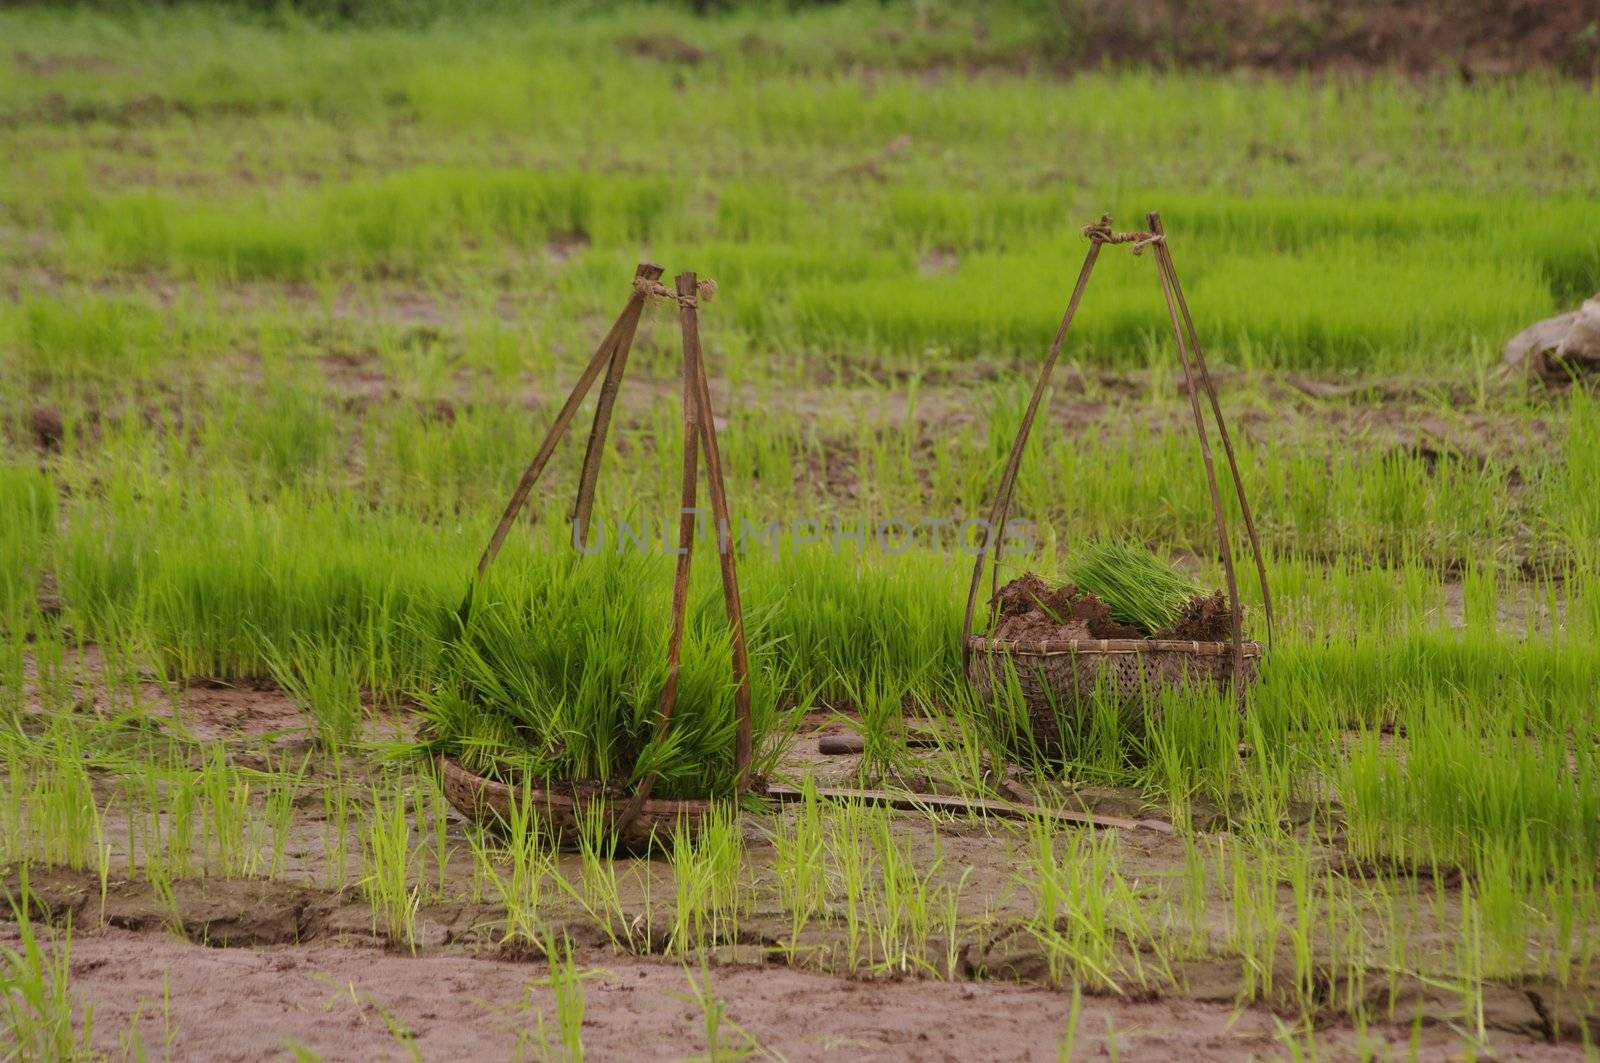 A palanquin amidst the rice fields. It is full of rice seedlings ready for transplanting. The palanquin used to transport everything. The women's campaign Vietnam never separate their palanquin.
This means of transport is also a symbol of Asia